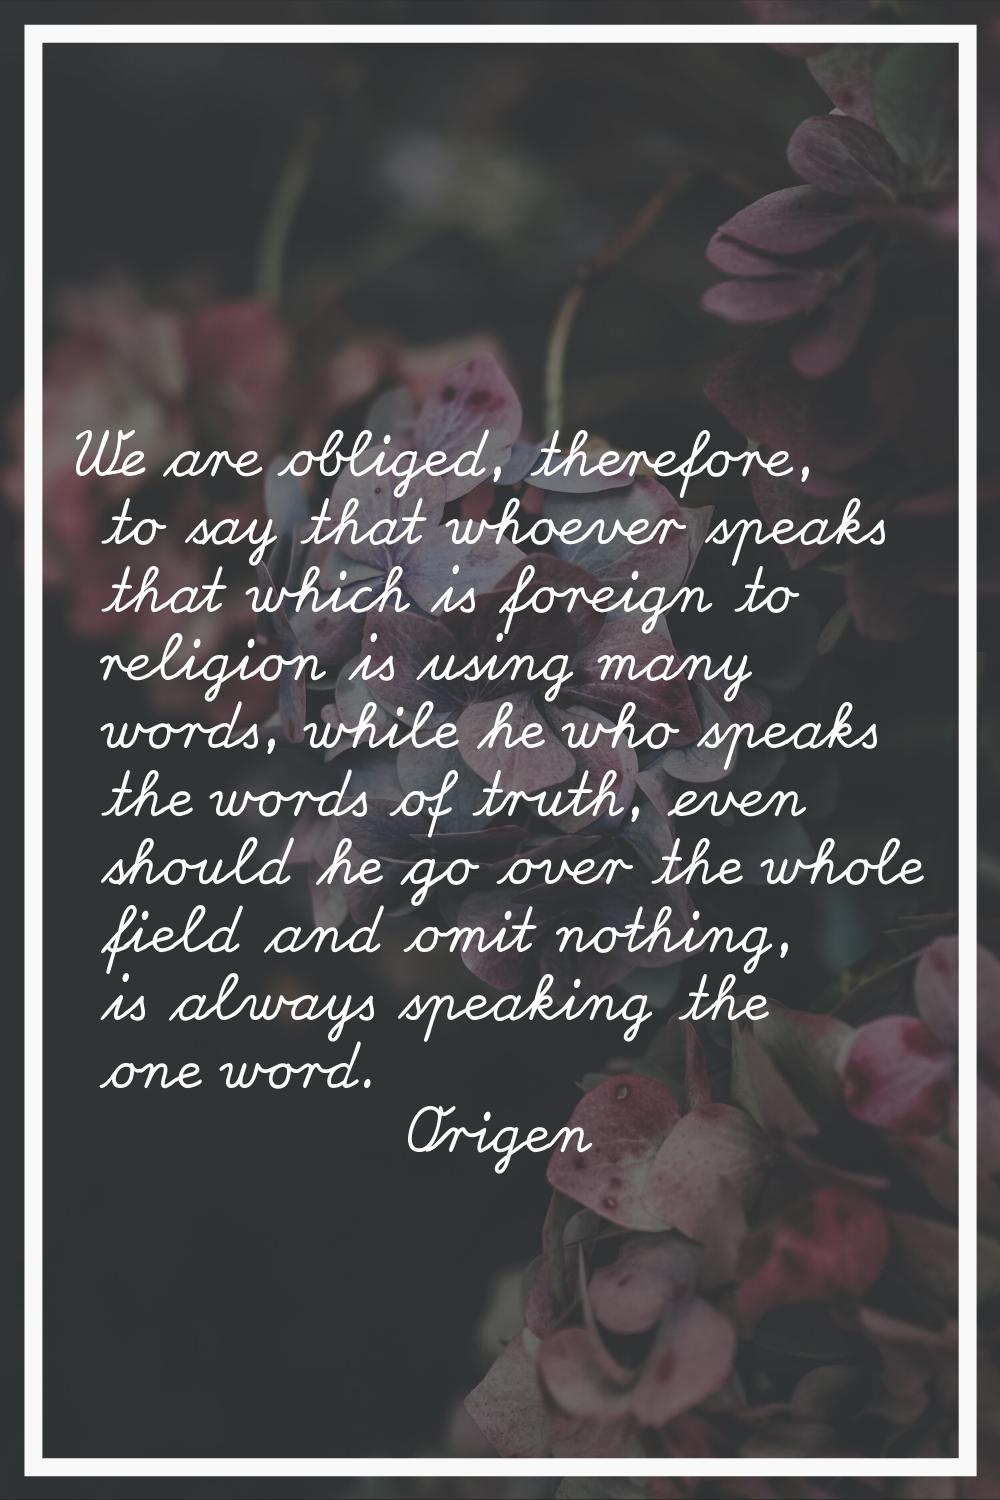 We are obliged, therefore, to say that whoever speaks that which is foreign to religion is using ma